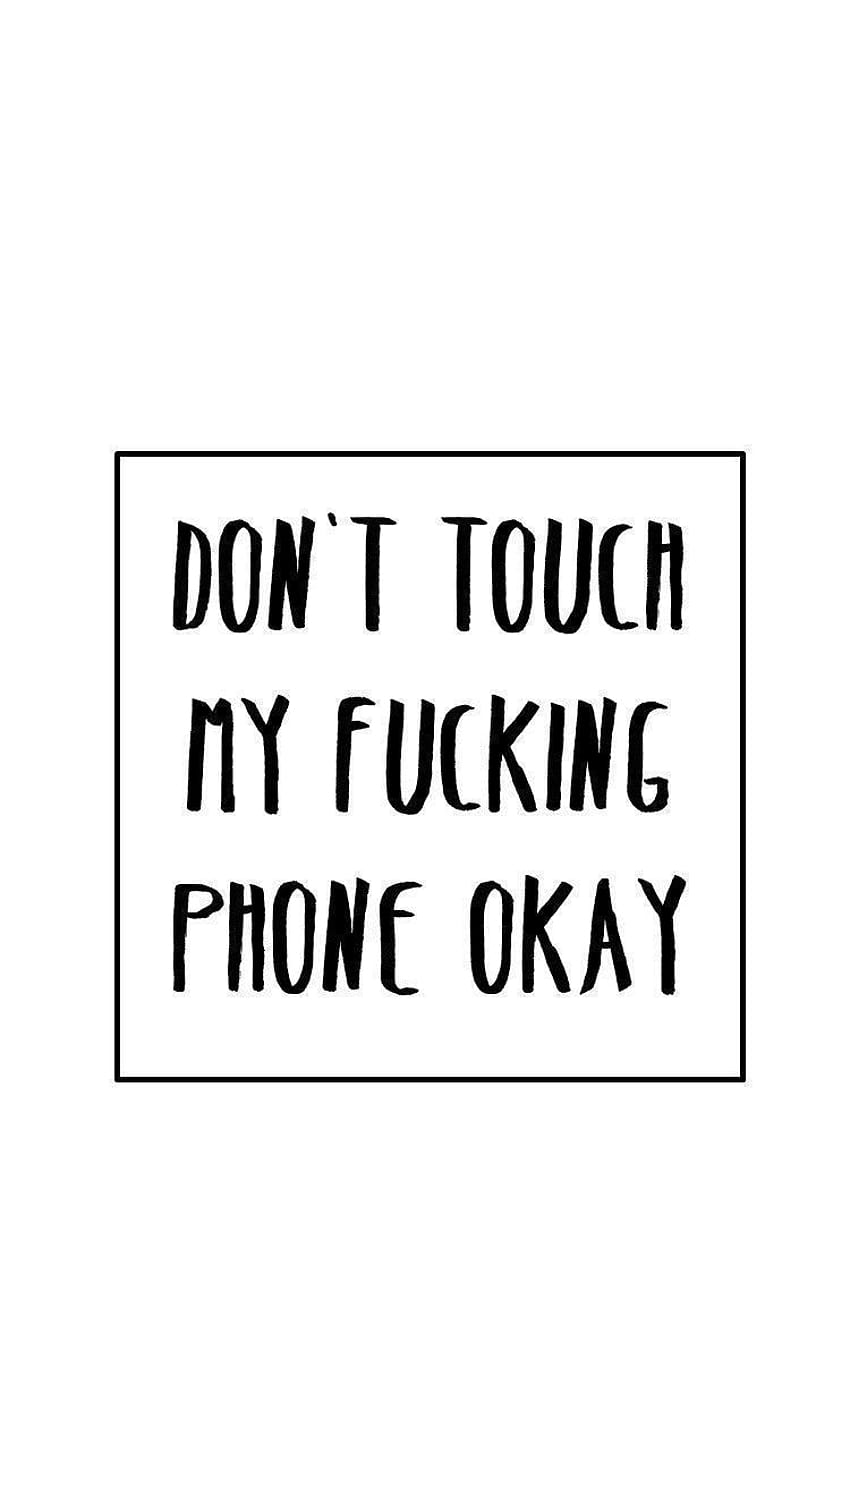 Don't touch my phone, dont touch HD phone wallpaper